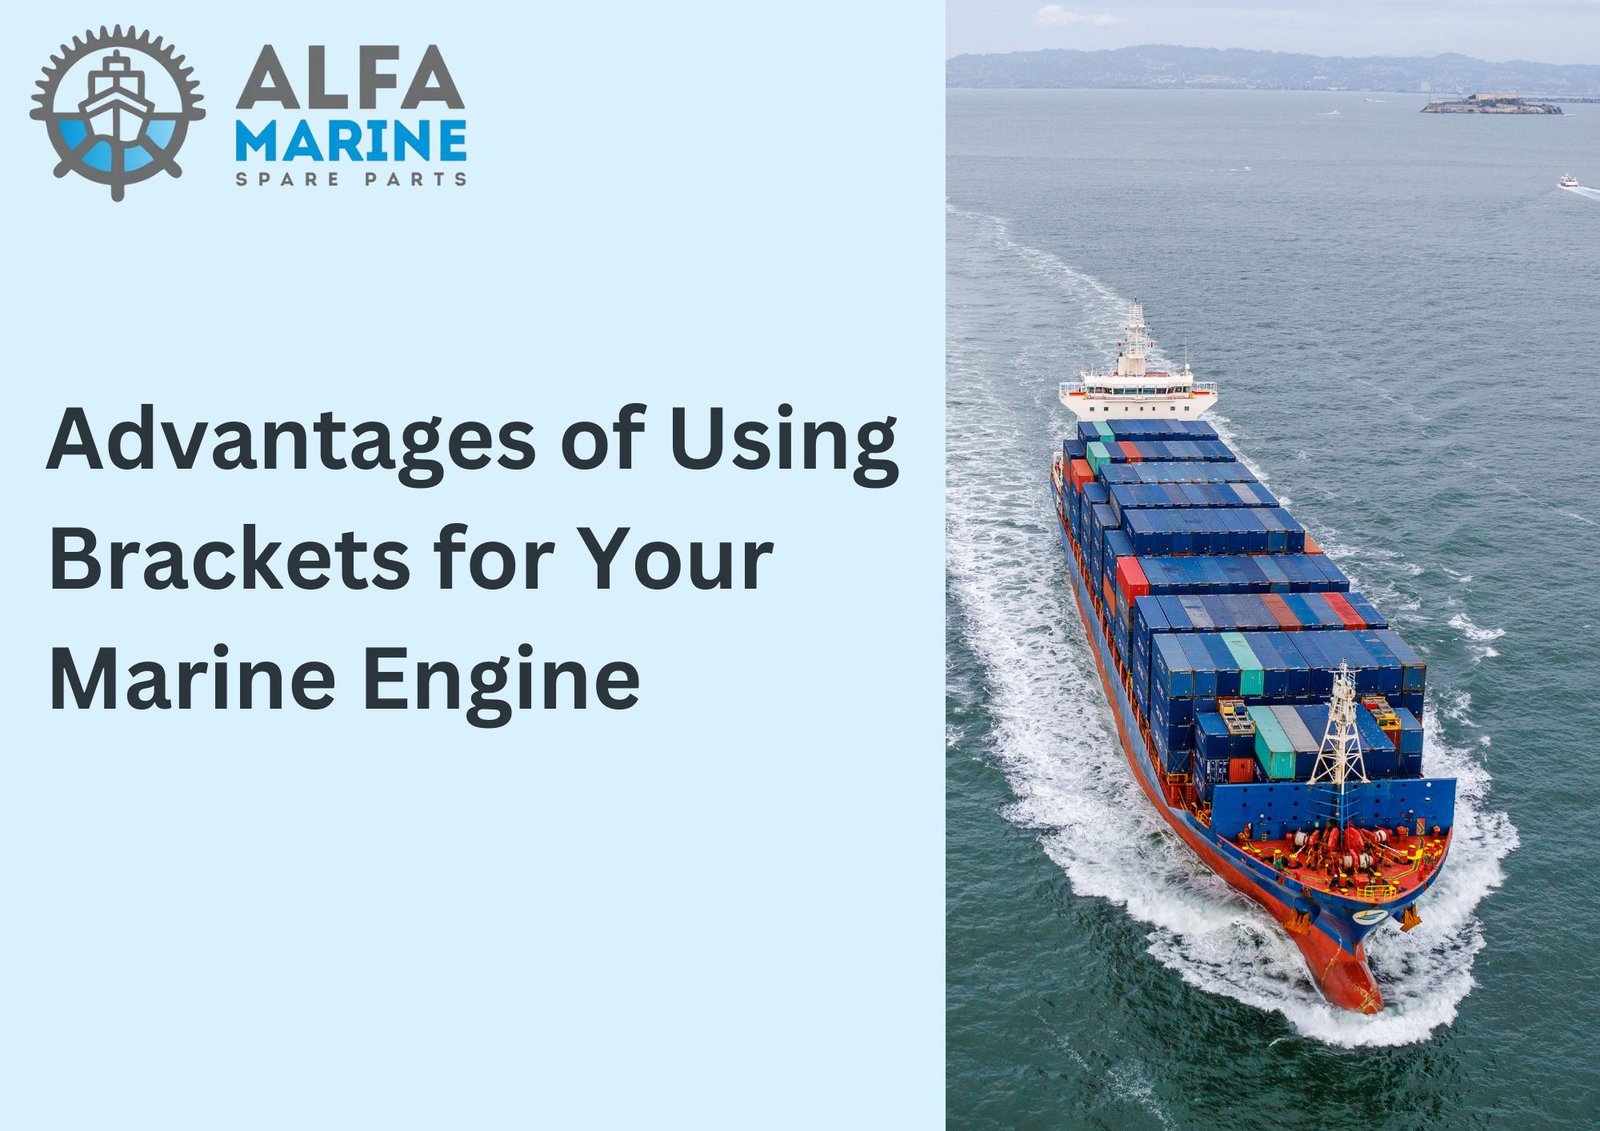 Advantages of Using Brackets for Your Marine Engine